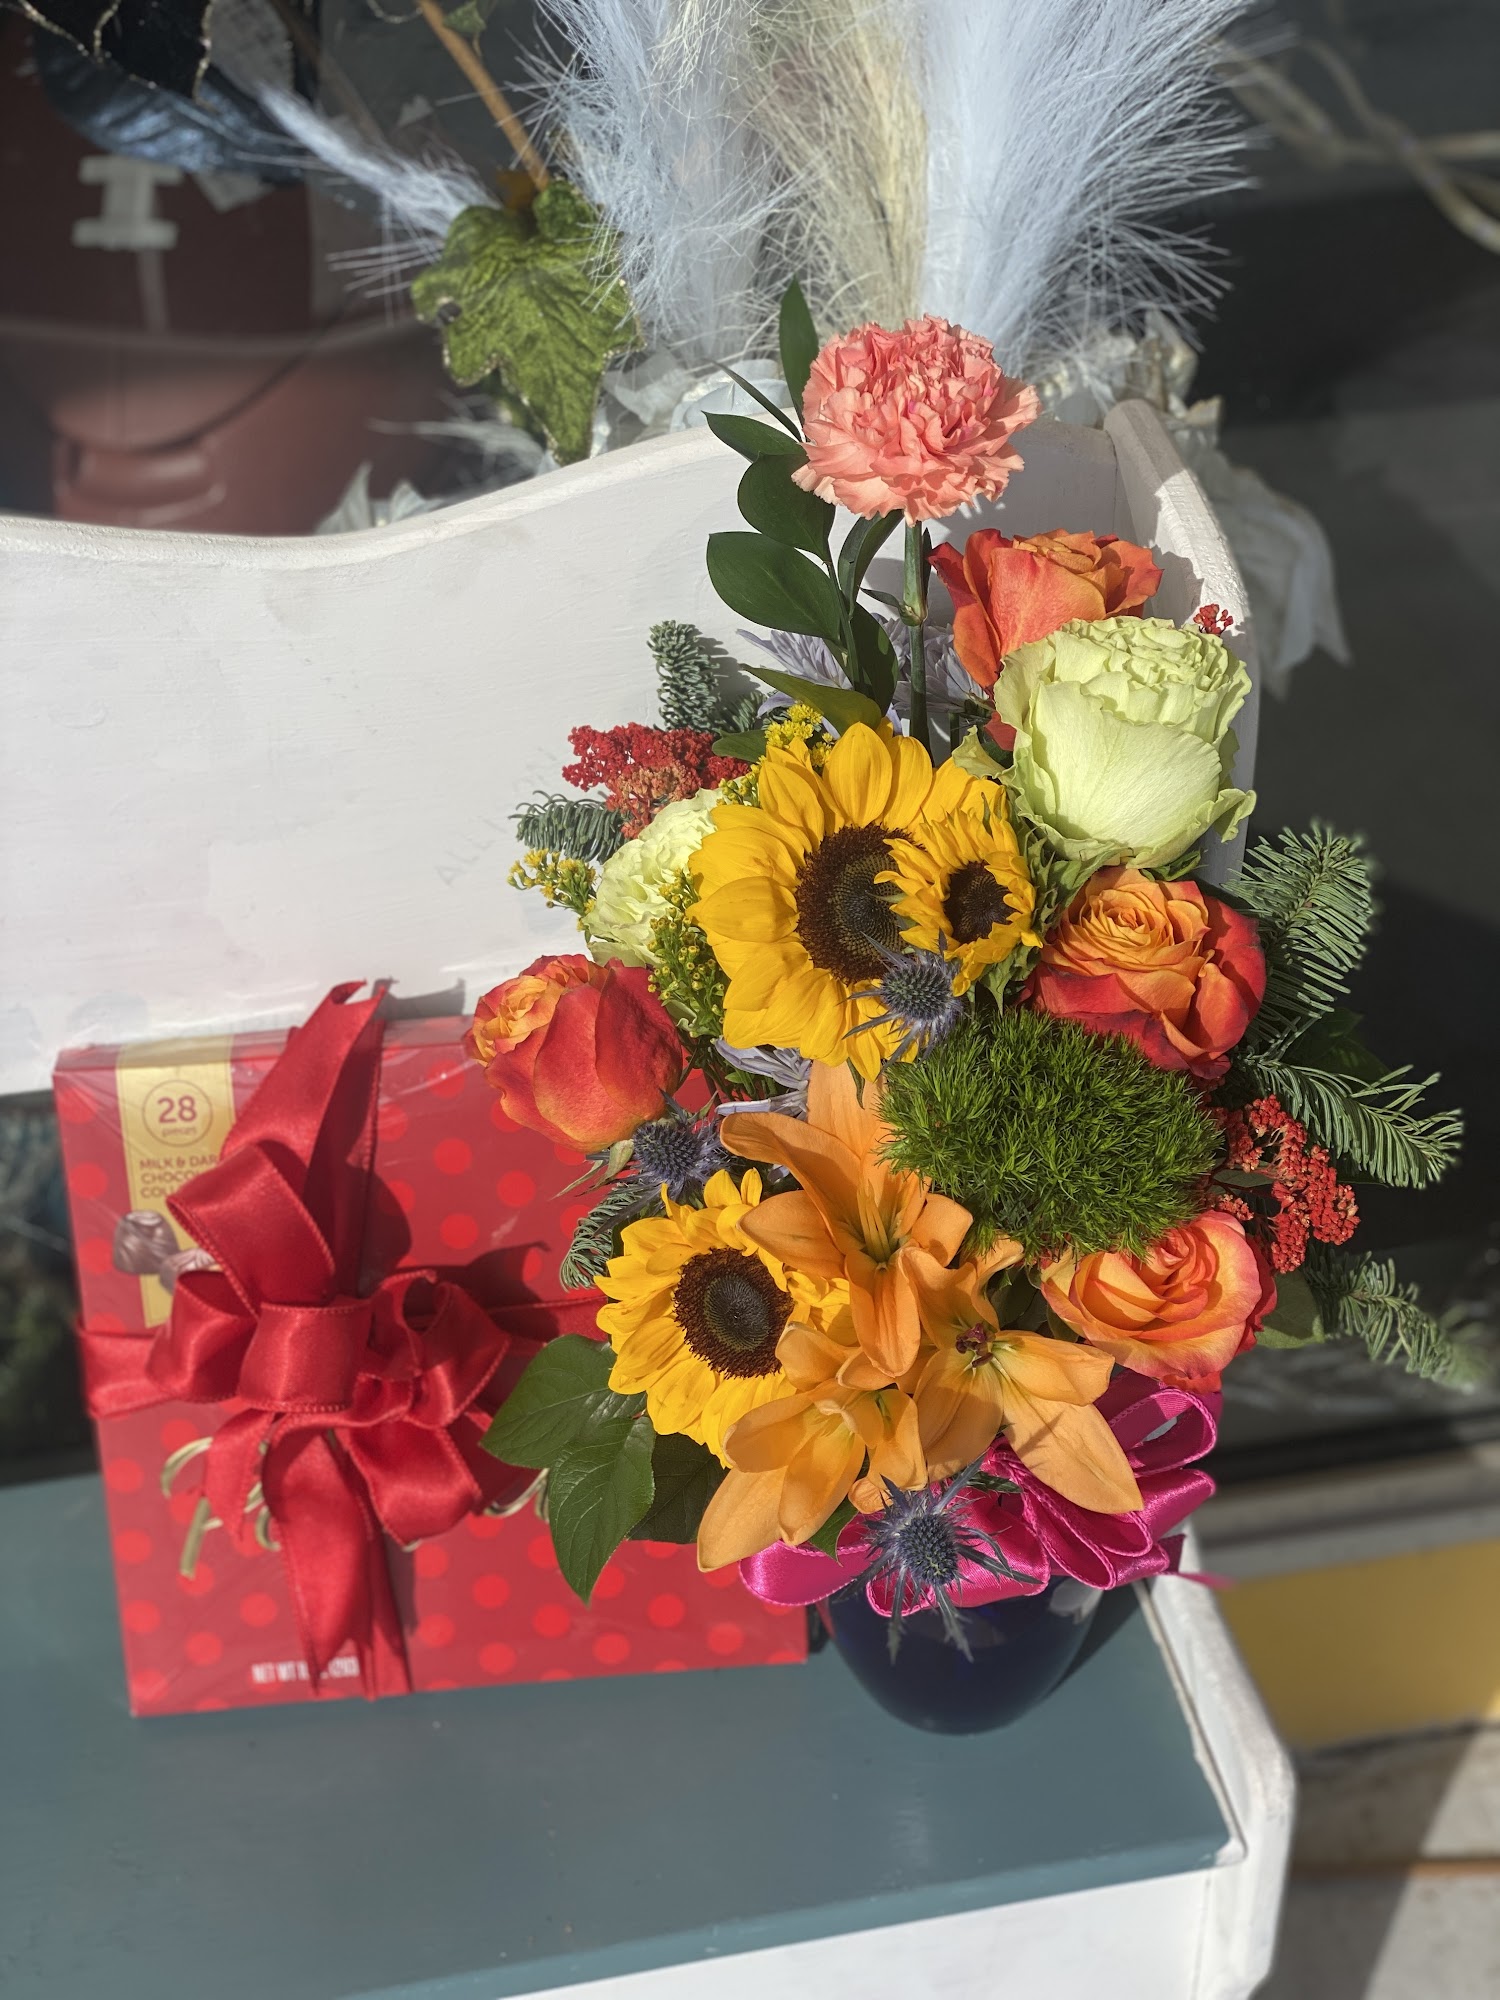 Anytime Flowers and Gifts 819 S Main St, Blackwell Oklahoma 74631